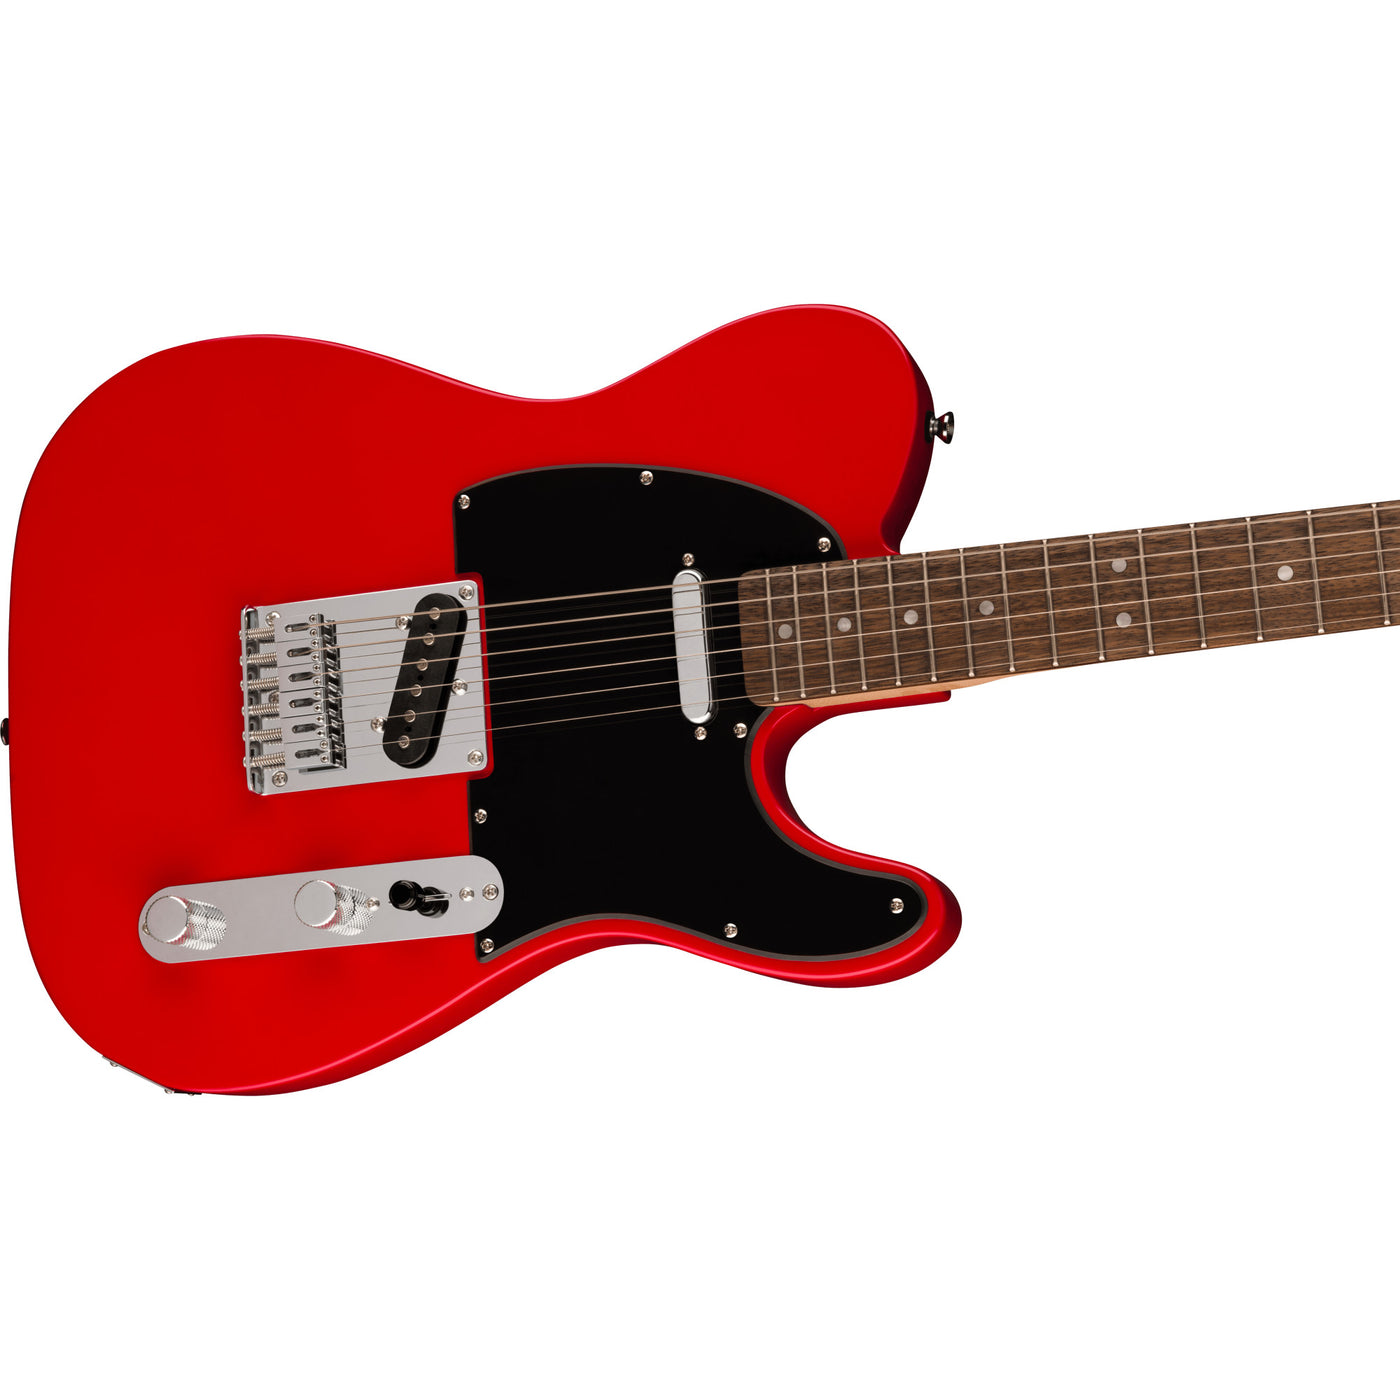 Squier Sonic Telecaster Electric Guitar, Torino Red (0373451558)